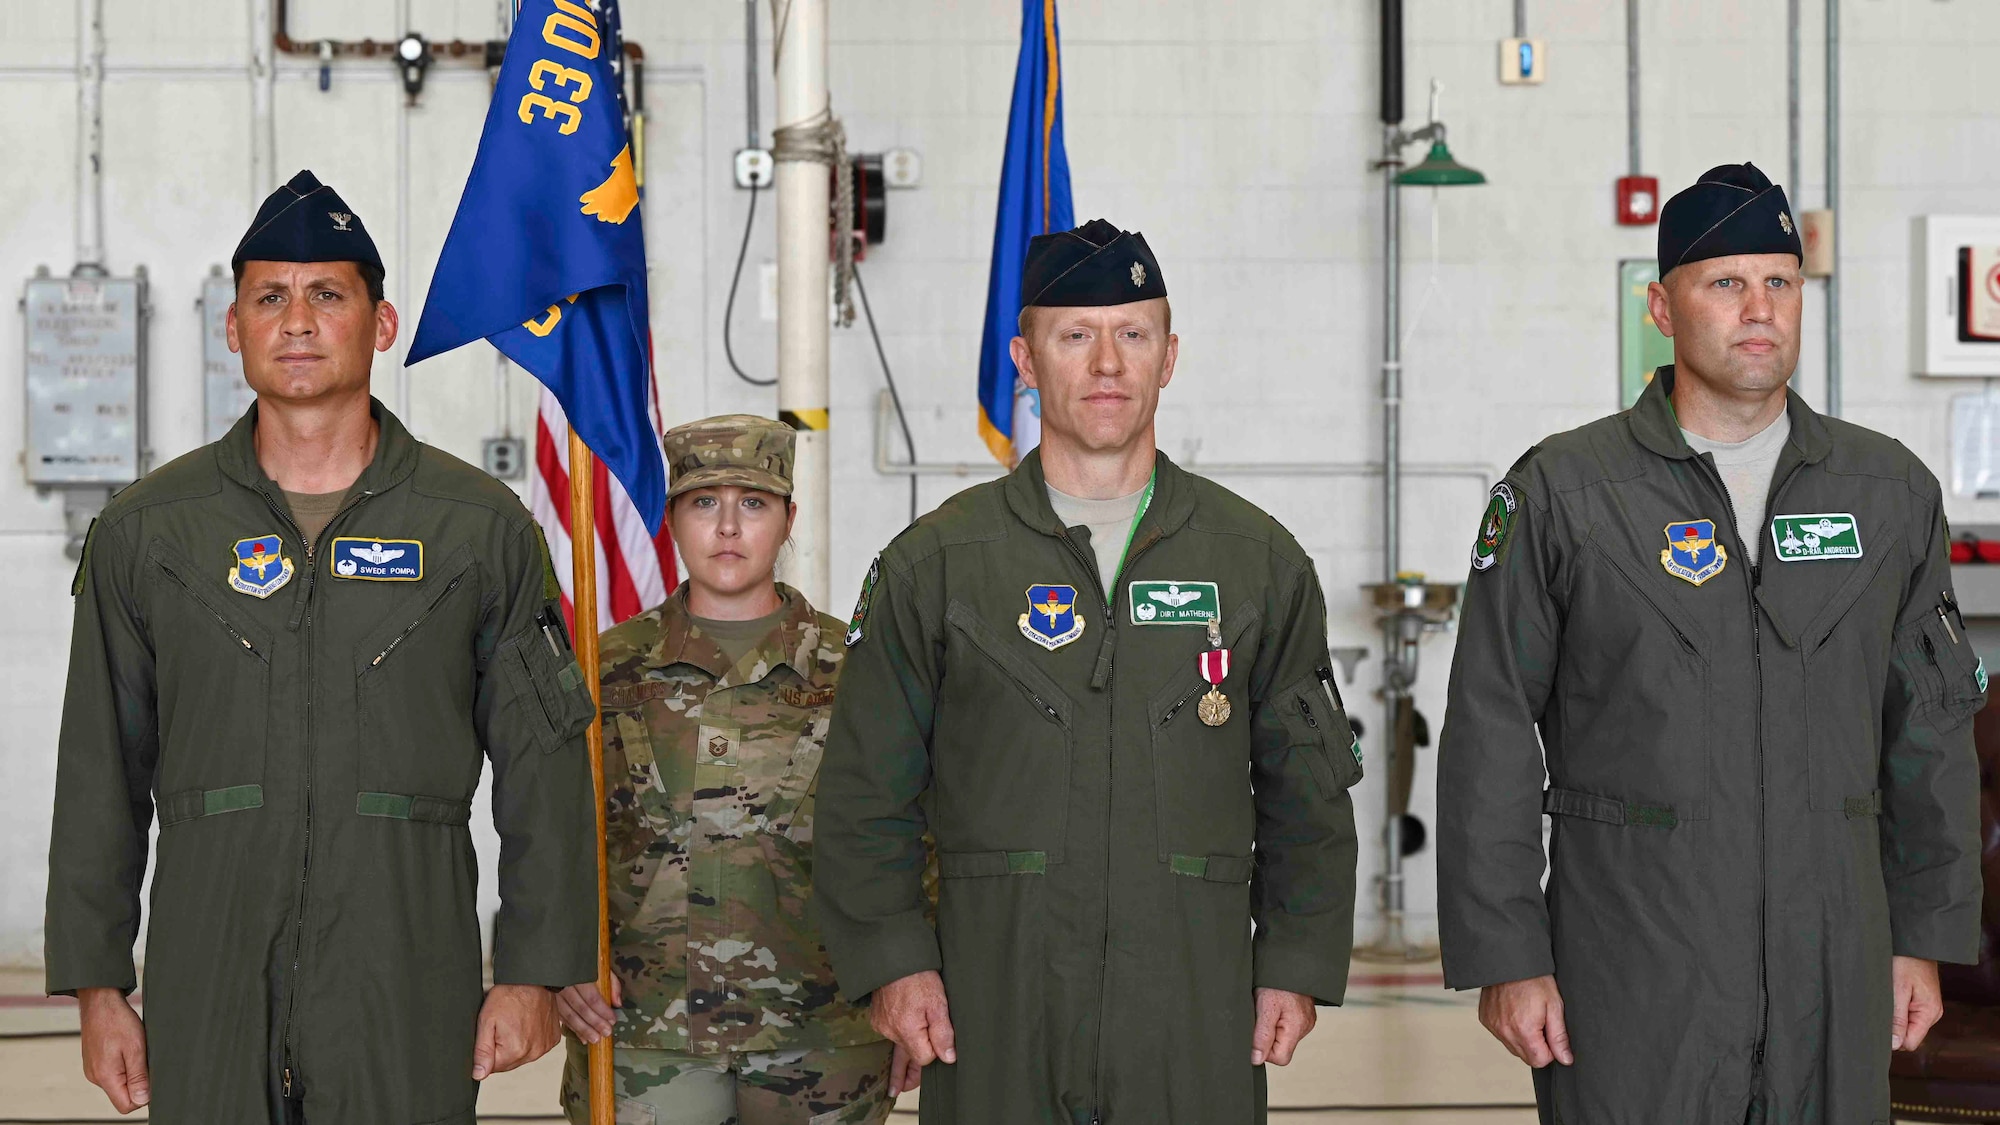 Andreotta assumes command of 33rd OSS